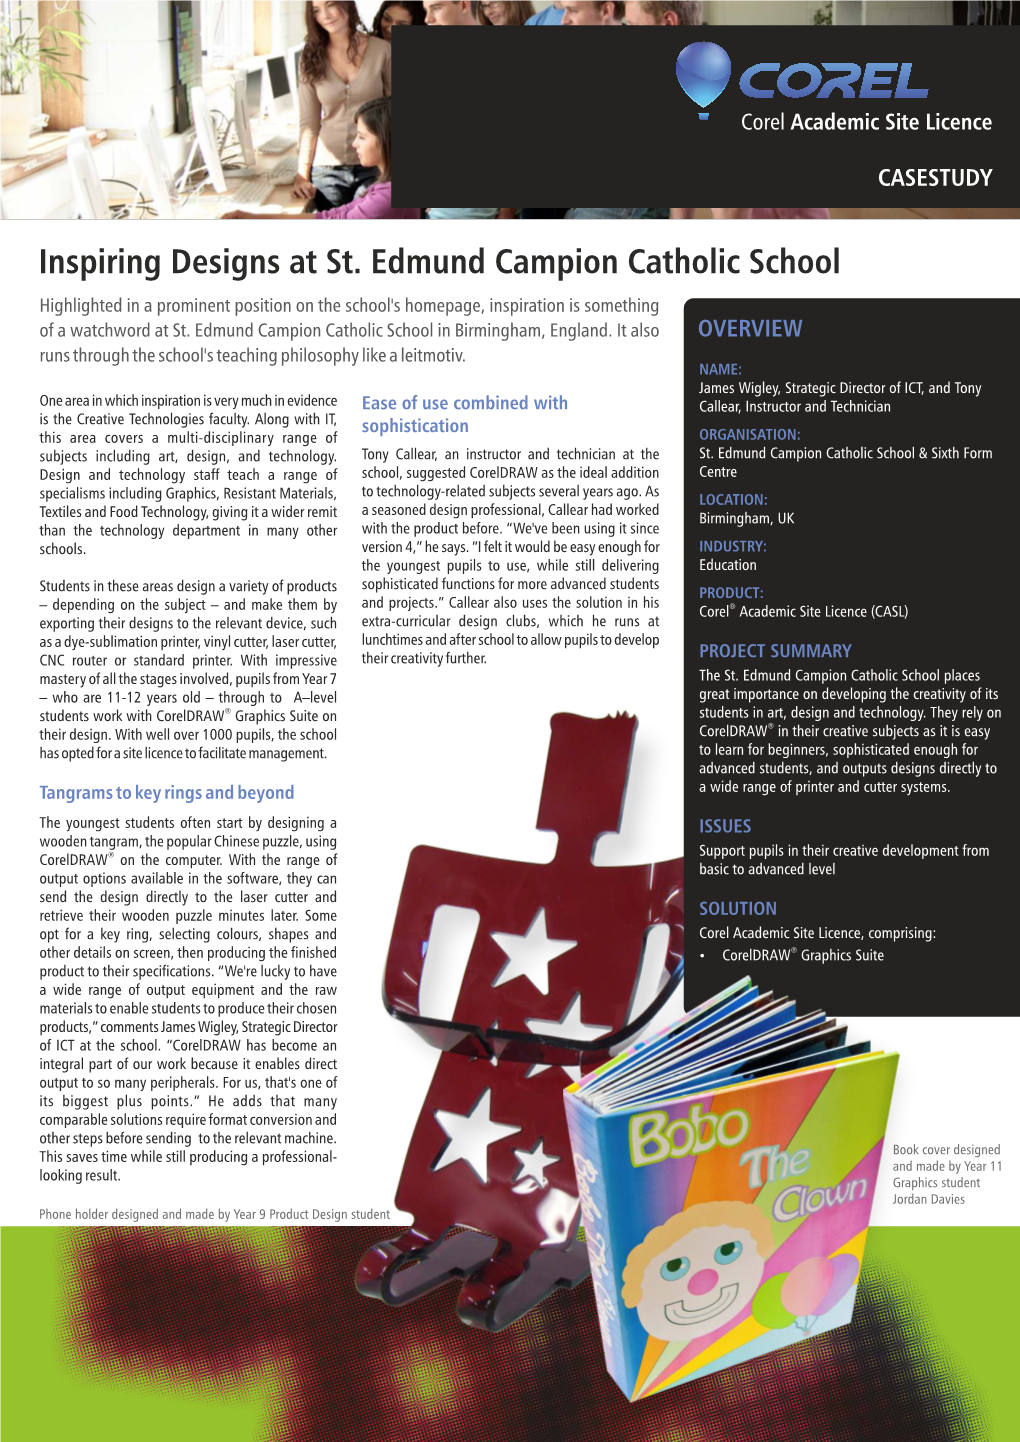 Inspiring Designs at St. Edmund Campion Catholic School Highlighted in a Prominent Position on the School's Homepage, Inspiration Is Something of a Watchword at St